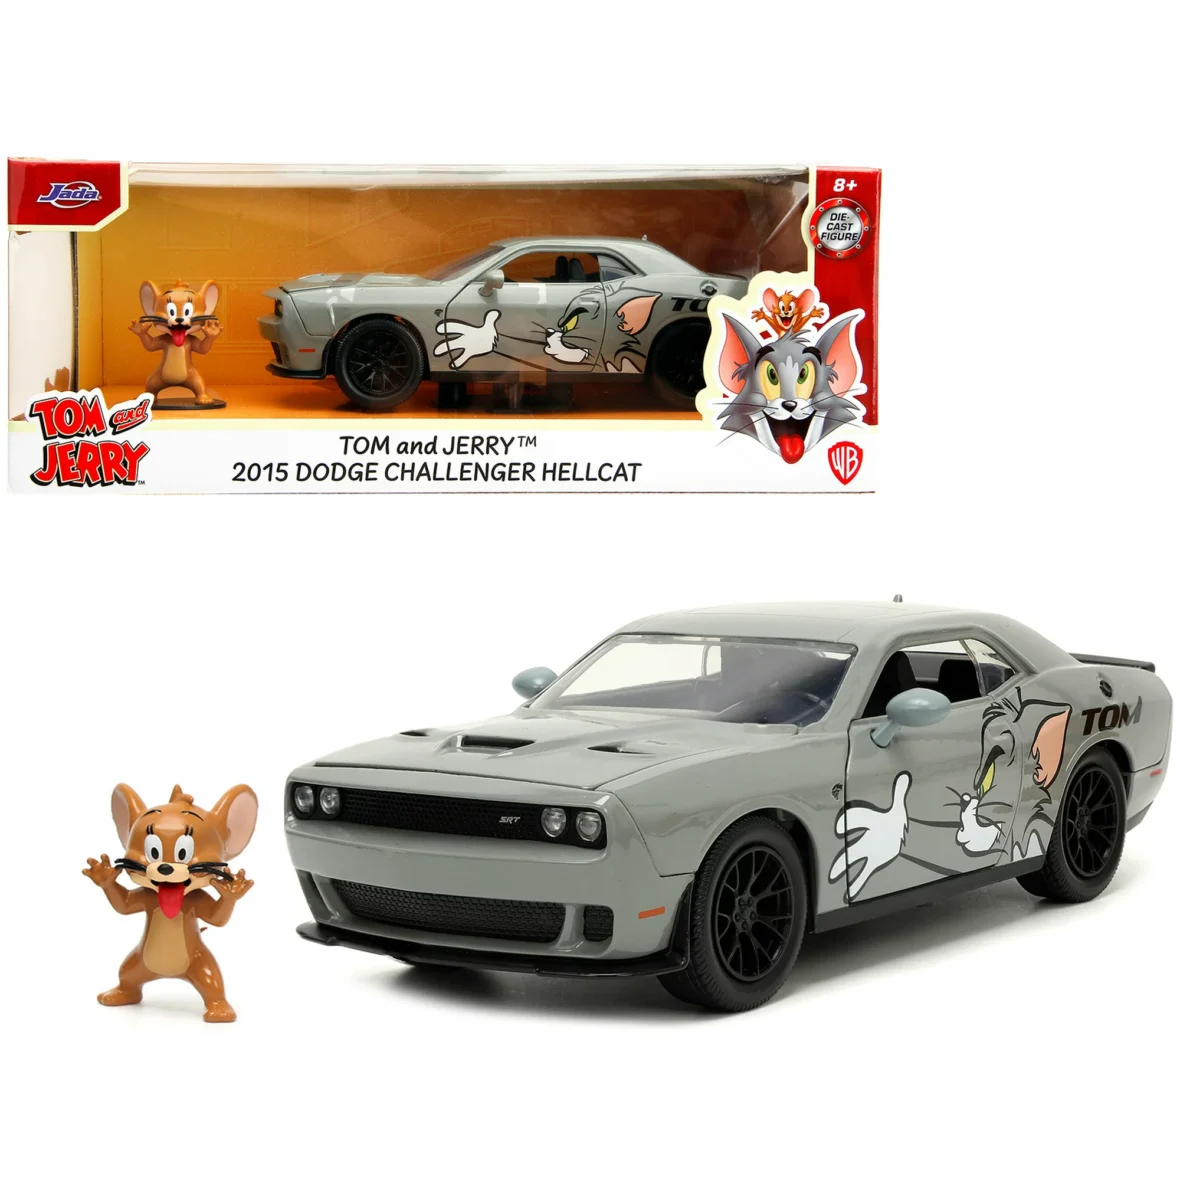 Jada Toys Tom and Jerry 1:24 2015 Dodge Challenger Hellcat Die-cast Car w/ 2.75″ Jerry Figure, Toys for Kids and Adults- COLLECTIBLE